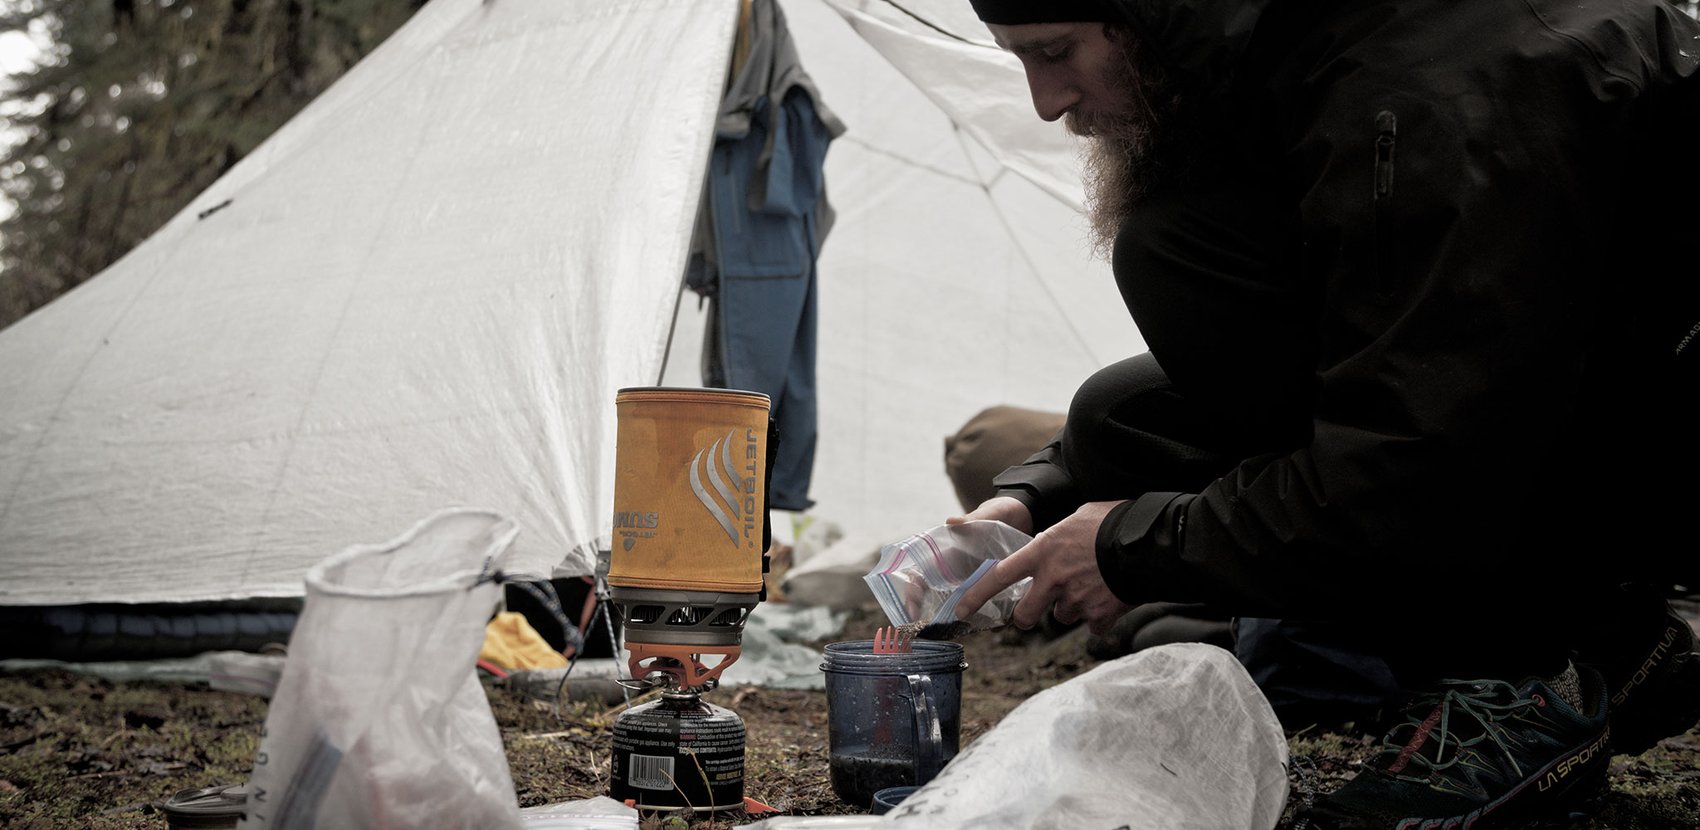 A man is preparing food in front of a tent.